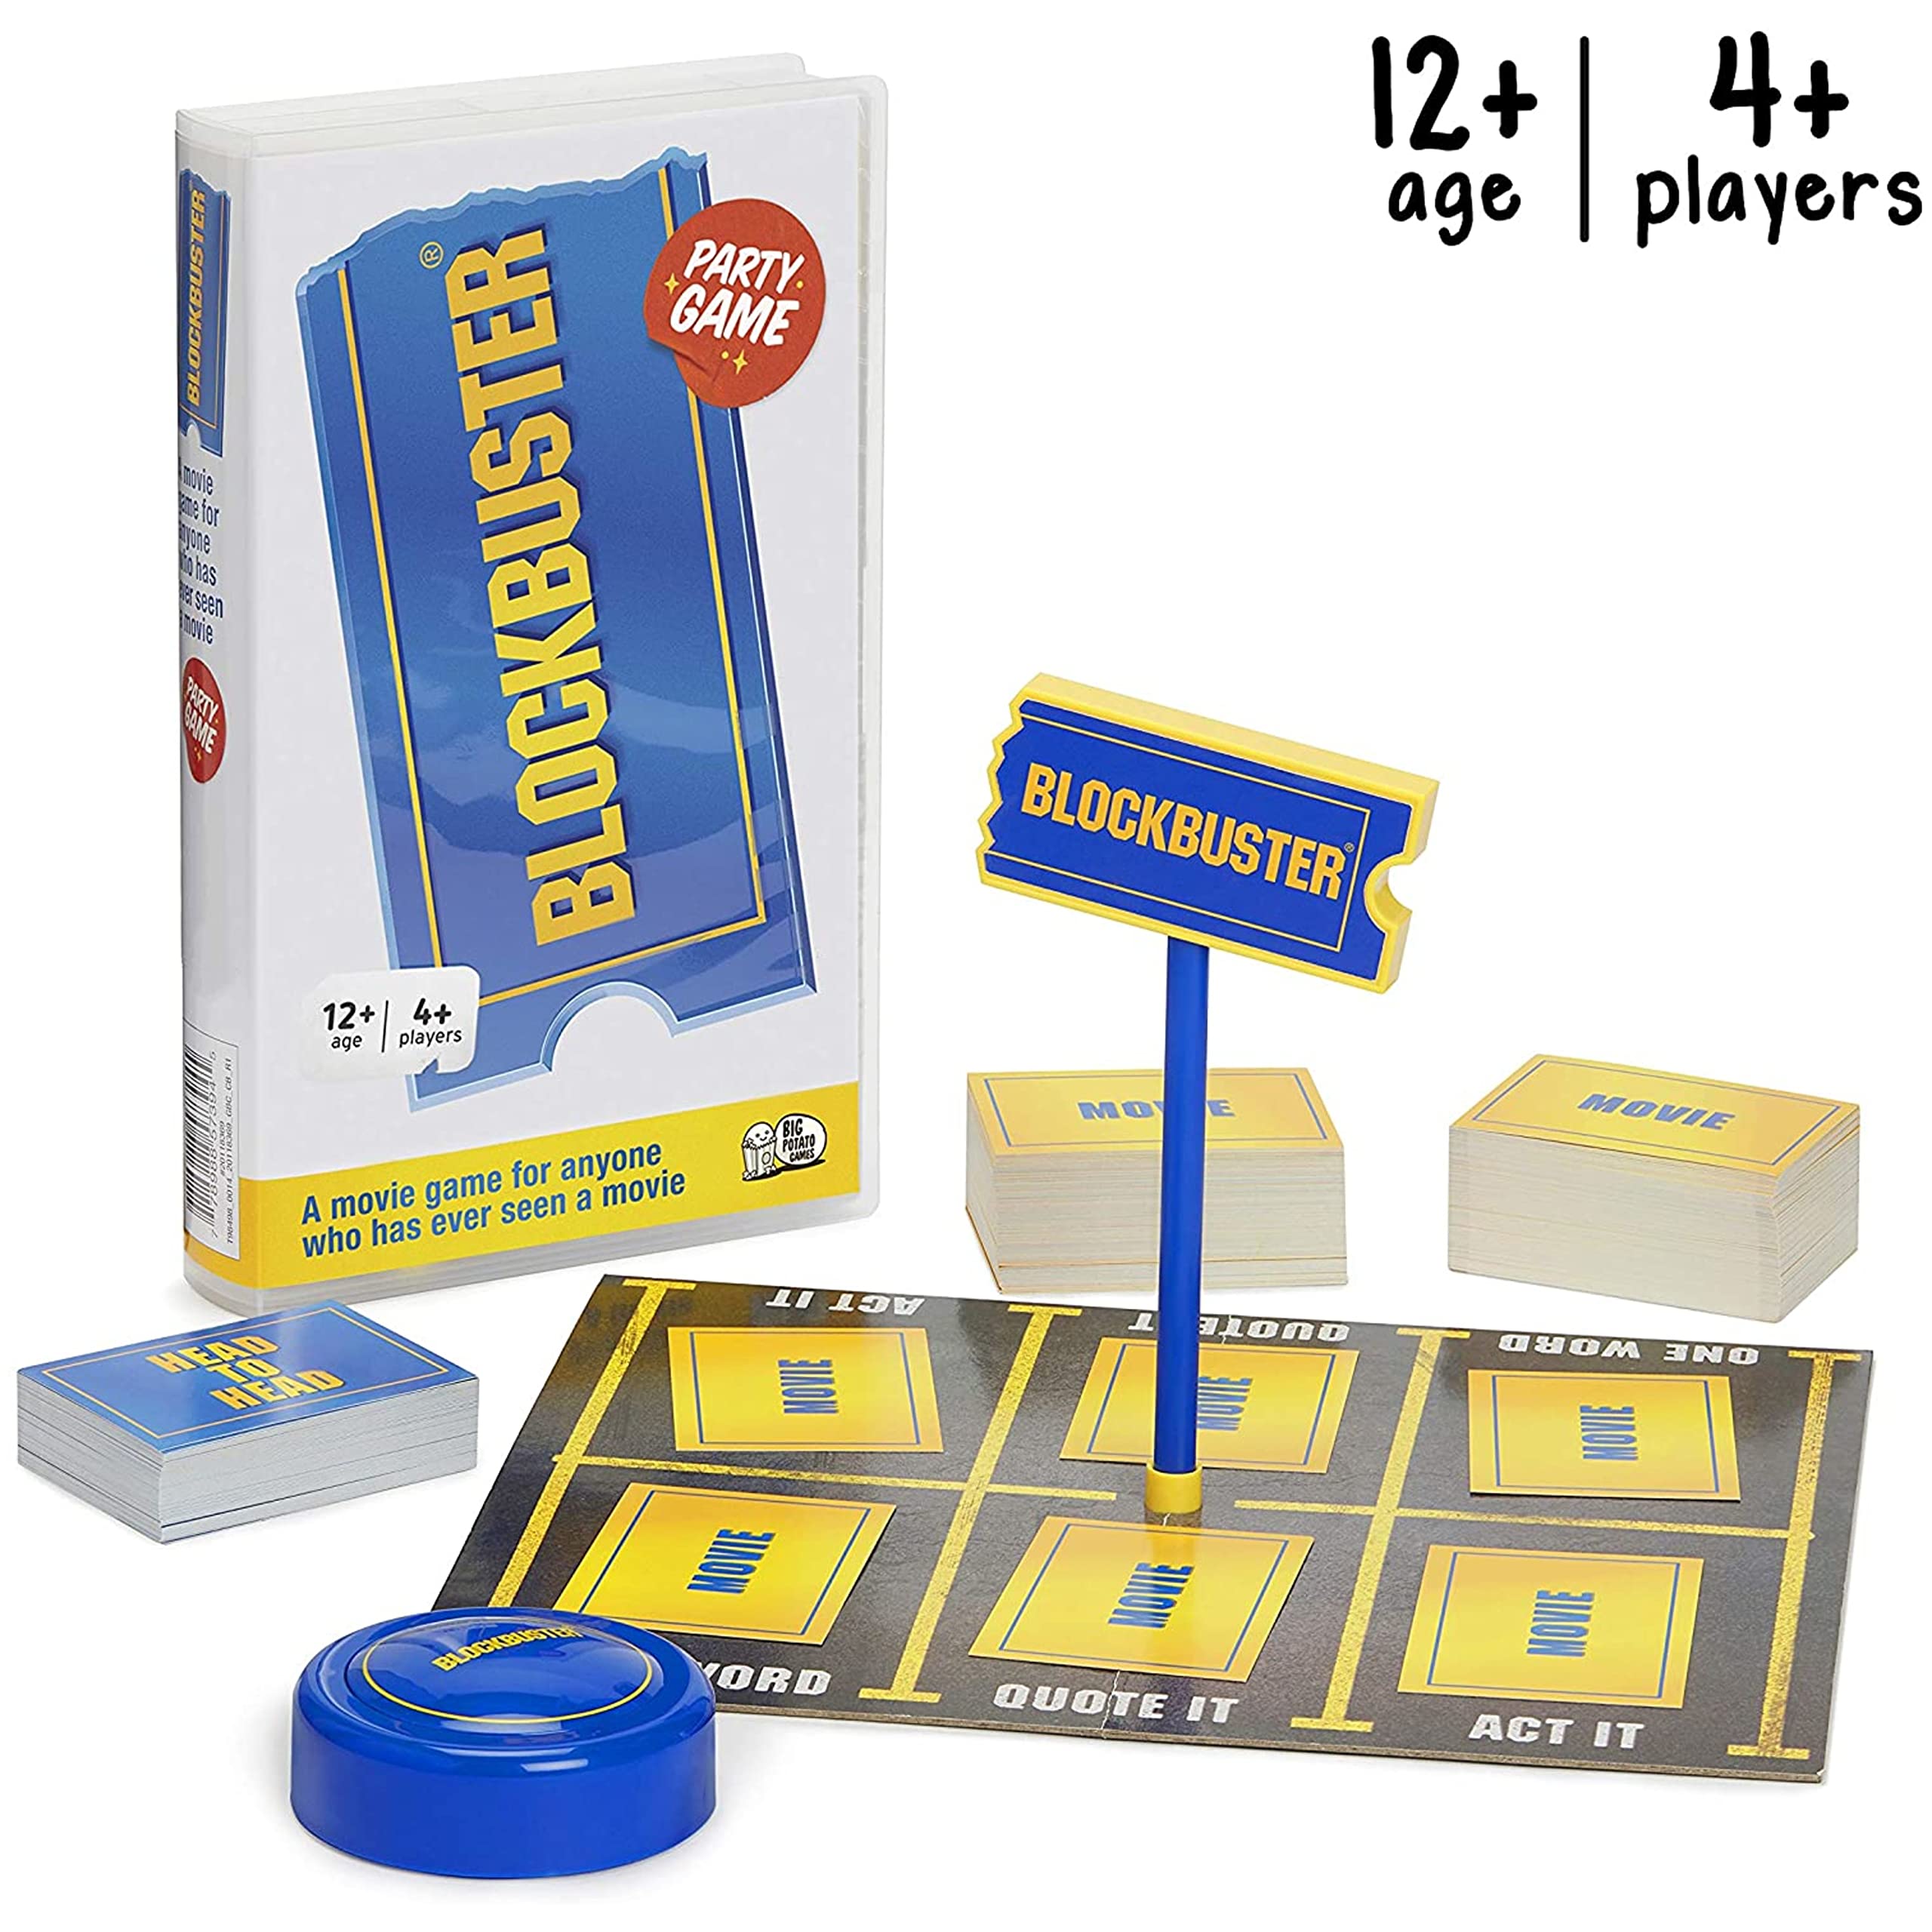 Big Potato The Blockbuster Game: A Movie Party Game for The Whole Family